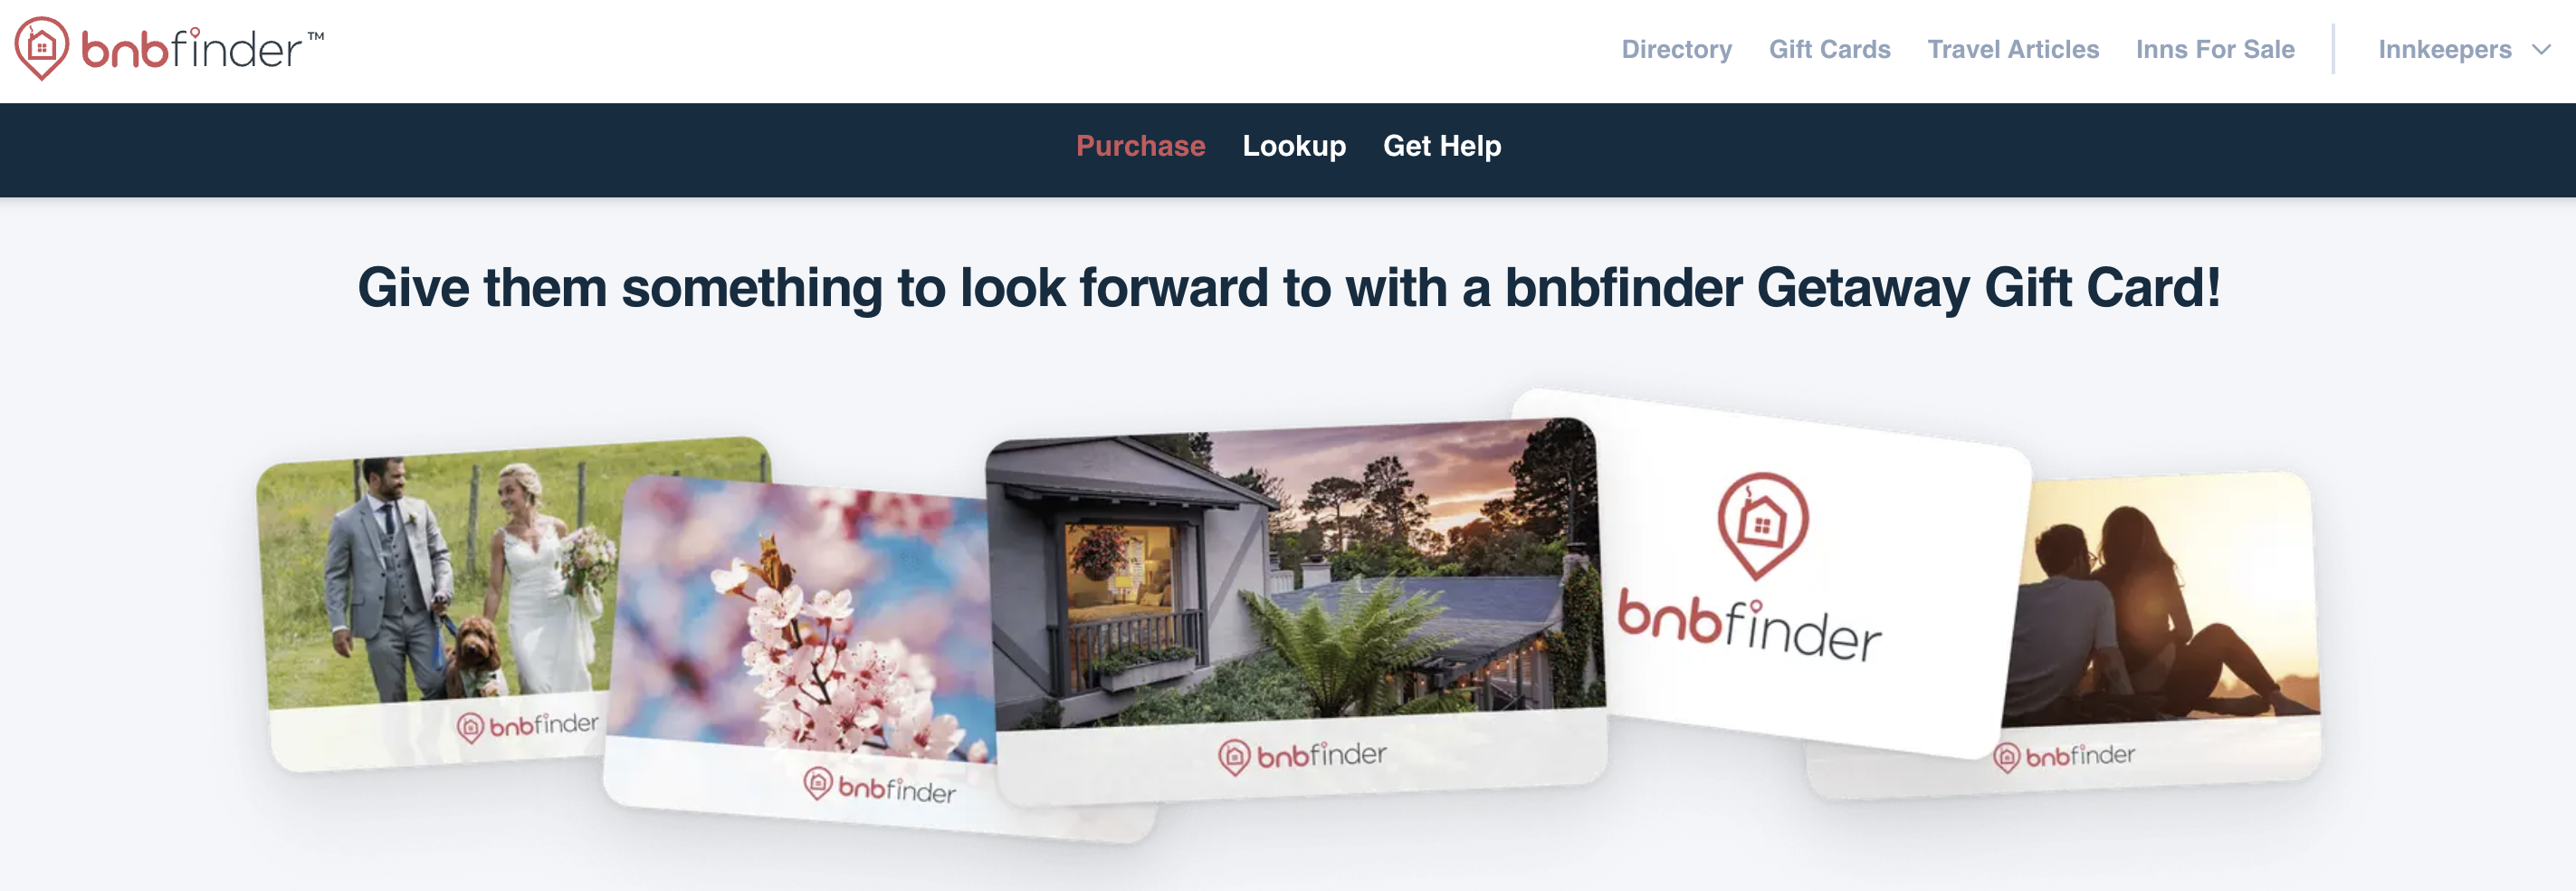 bnbfinder Gift Card Purchase Page